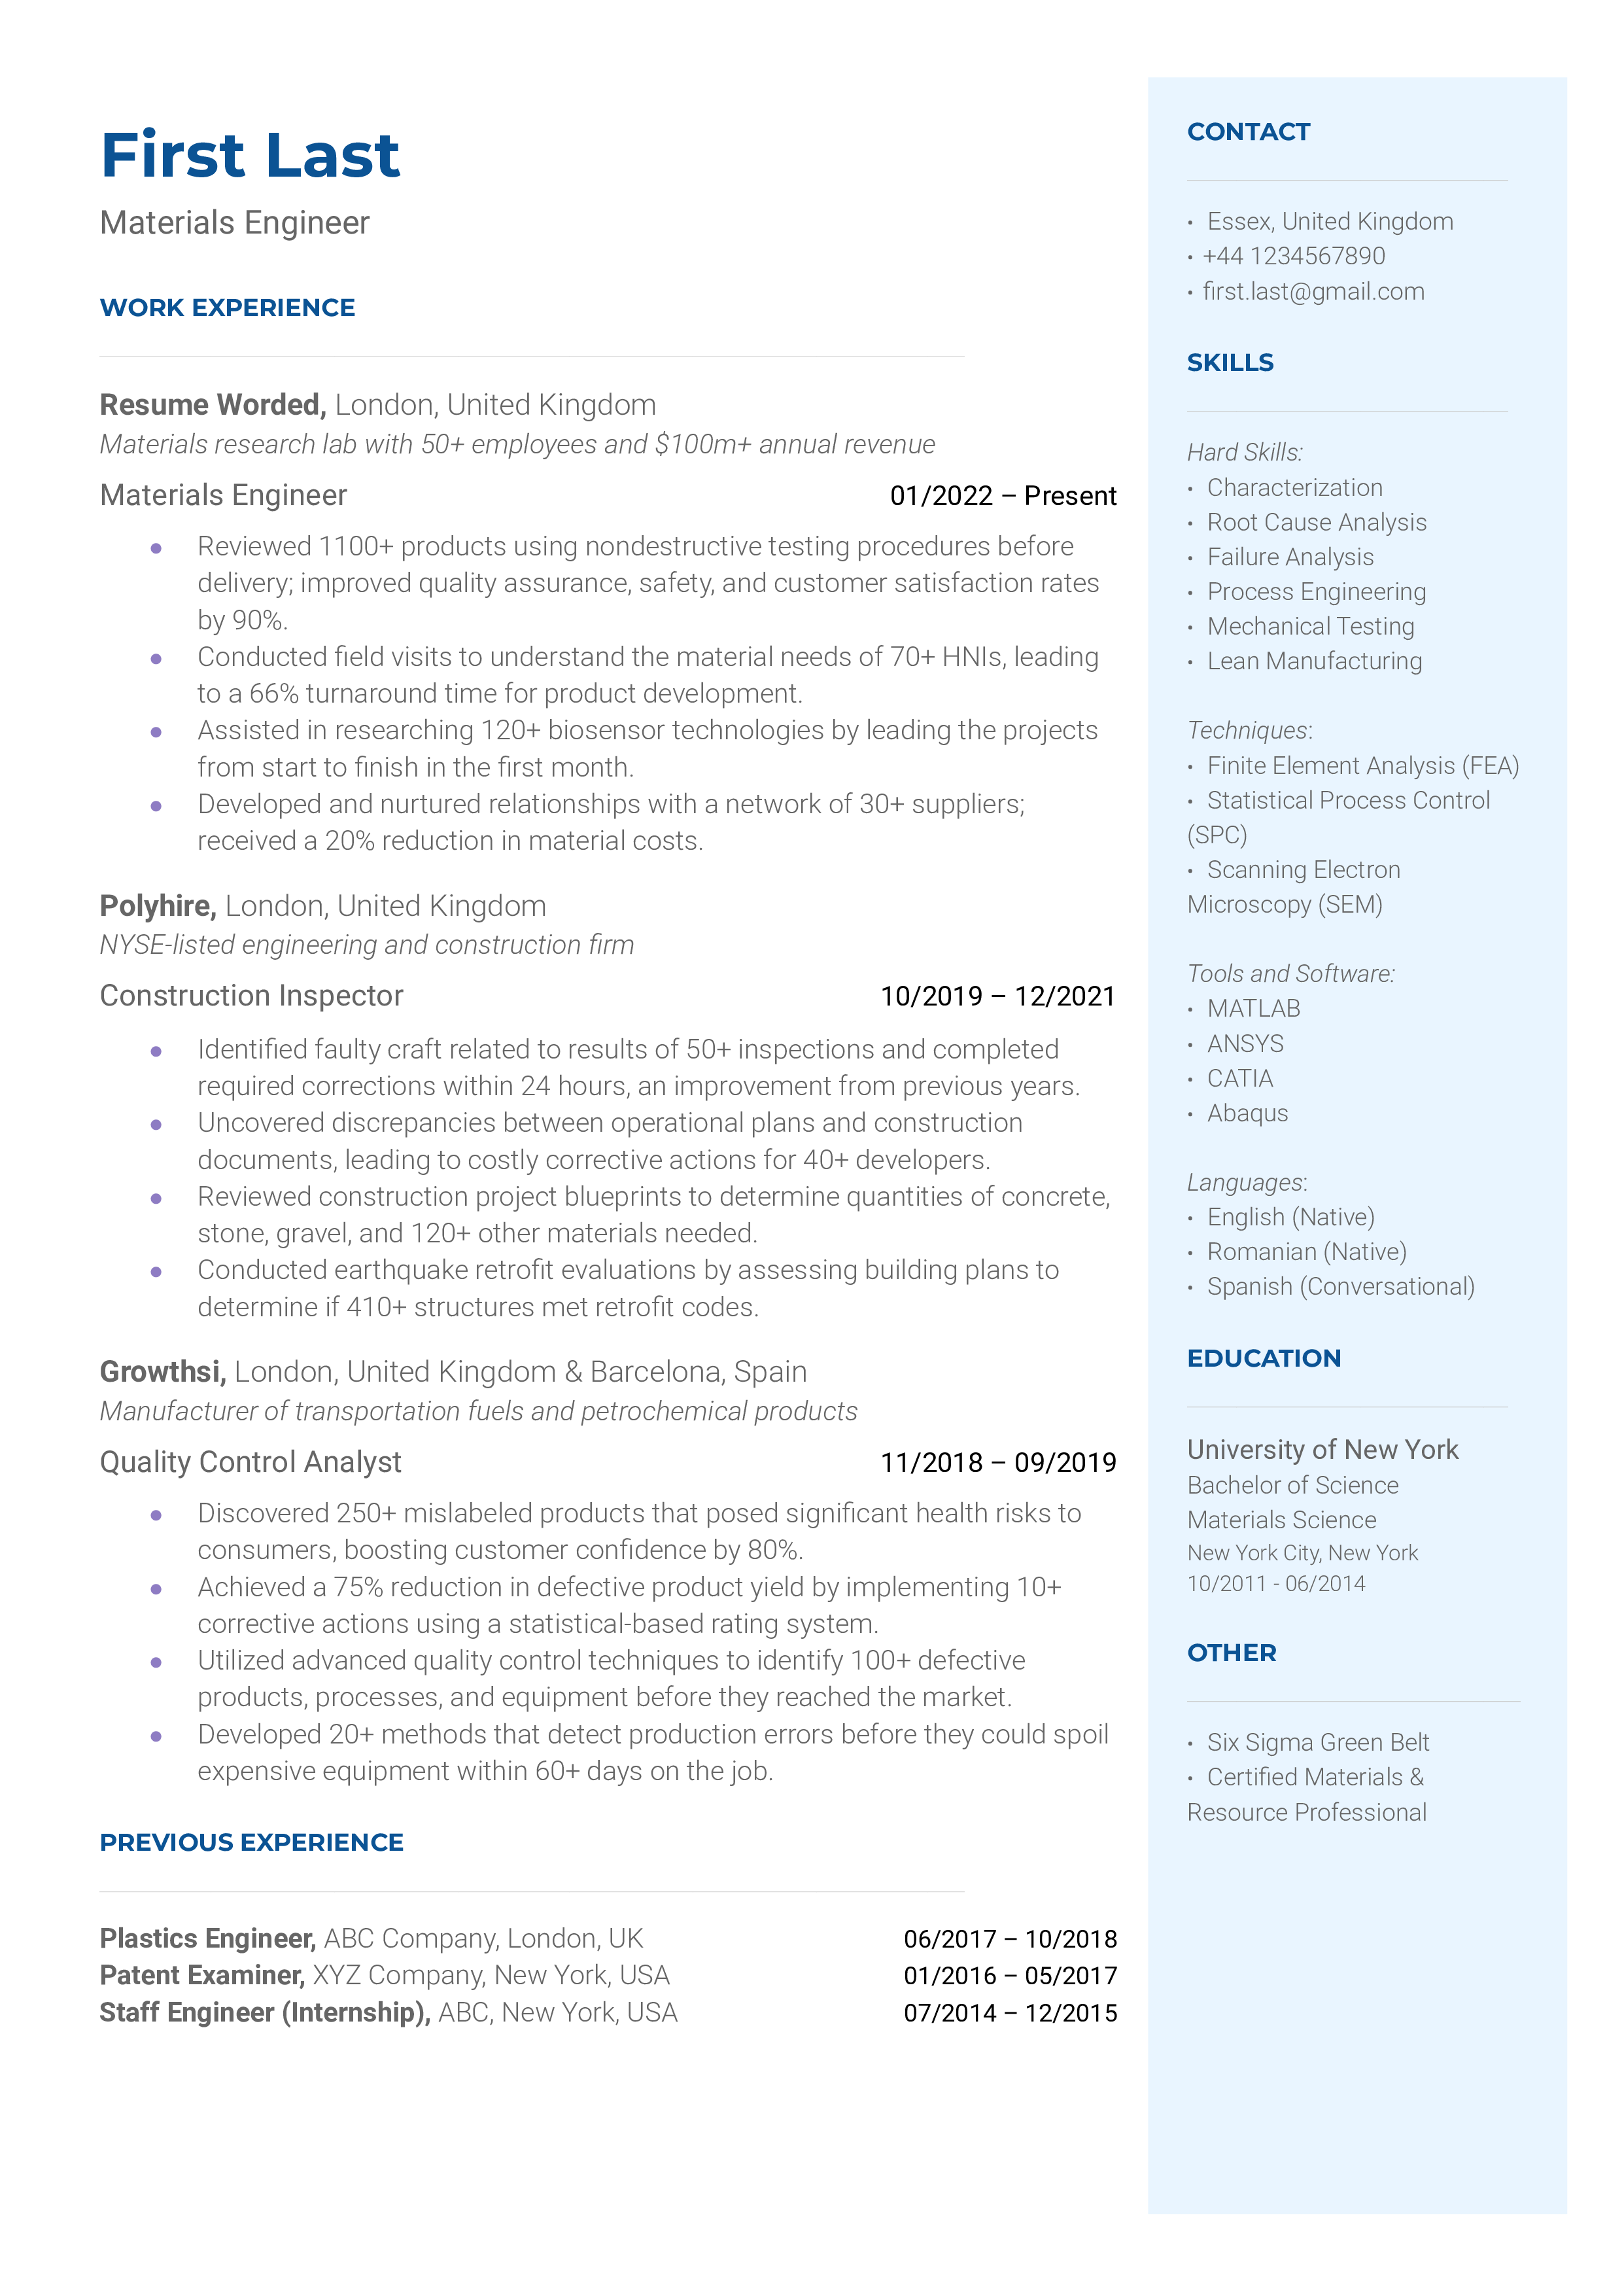 A materials engineer resume template highlighting engineering techniques.